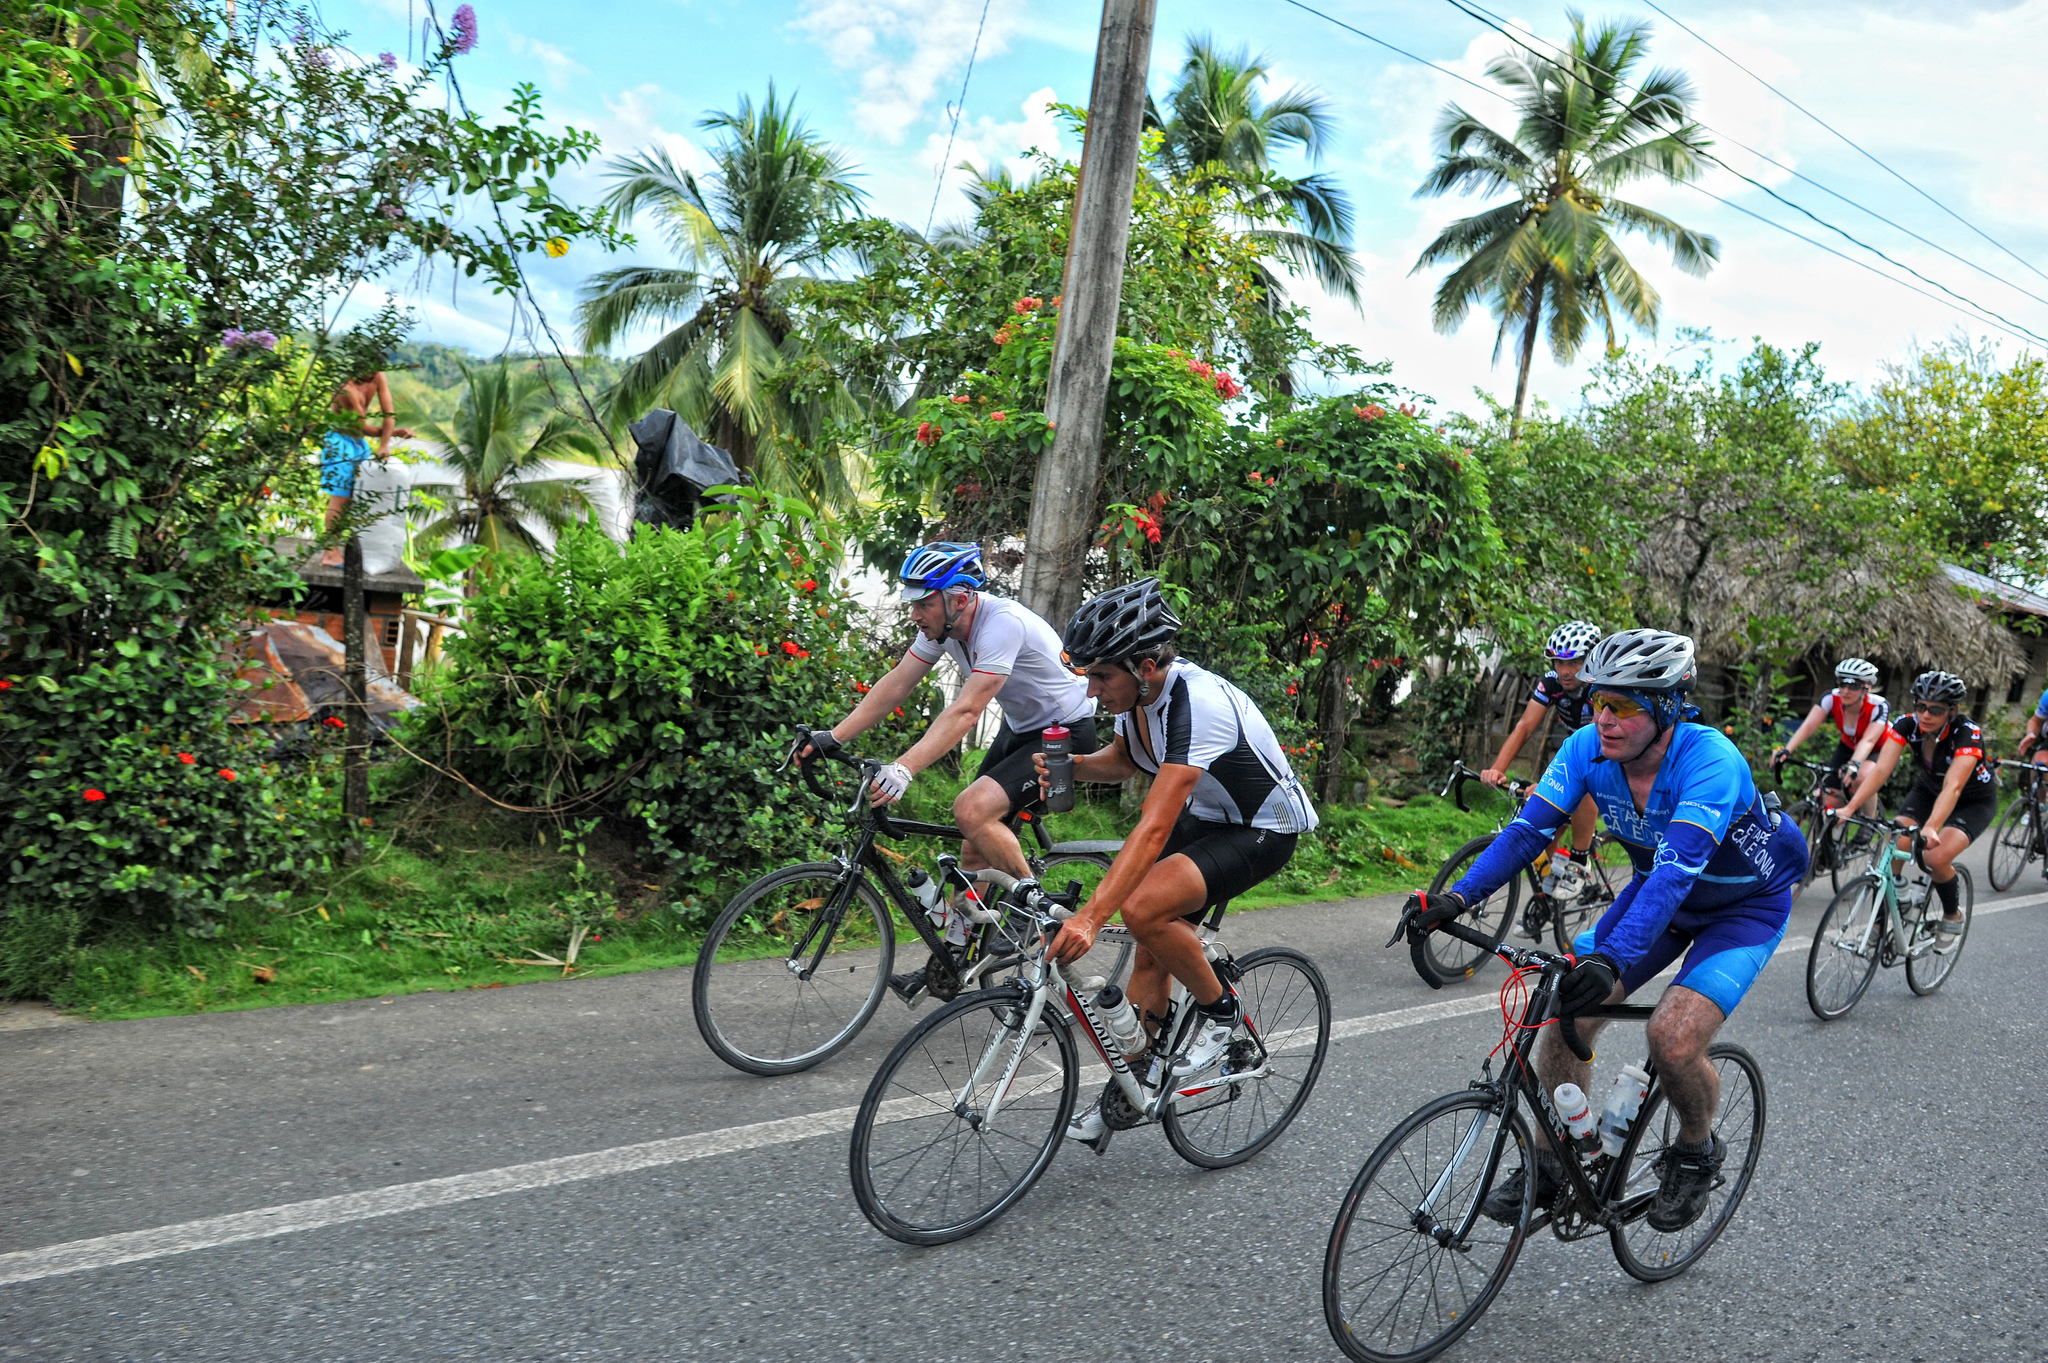 tour colombia cycling